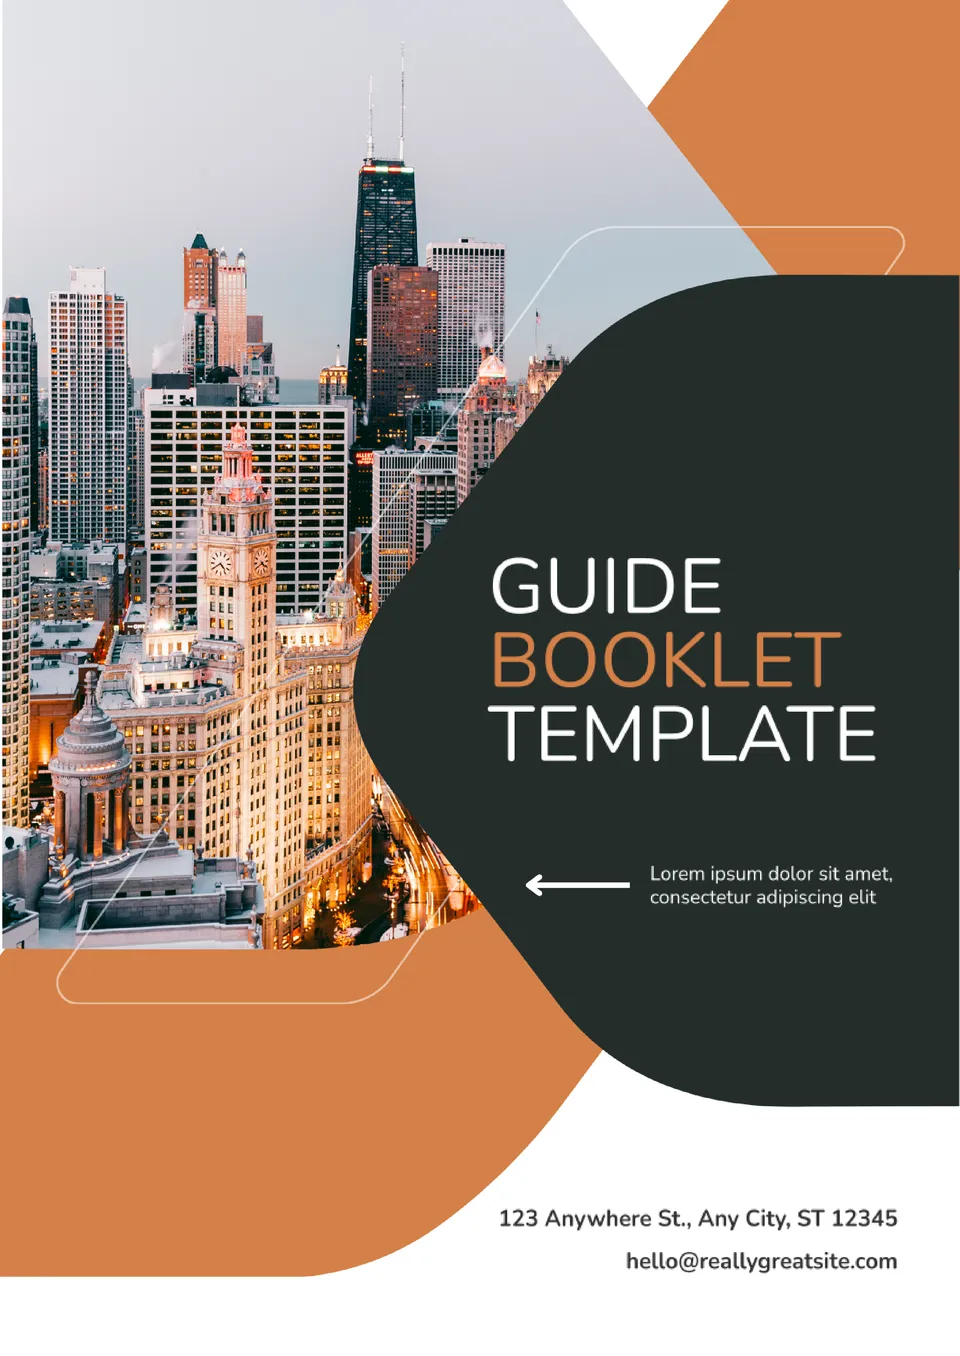 Guide Booklet Template